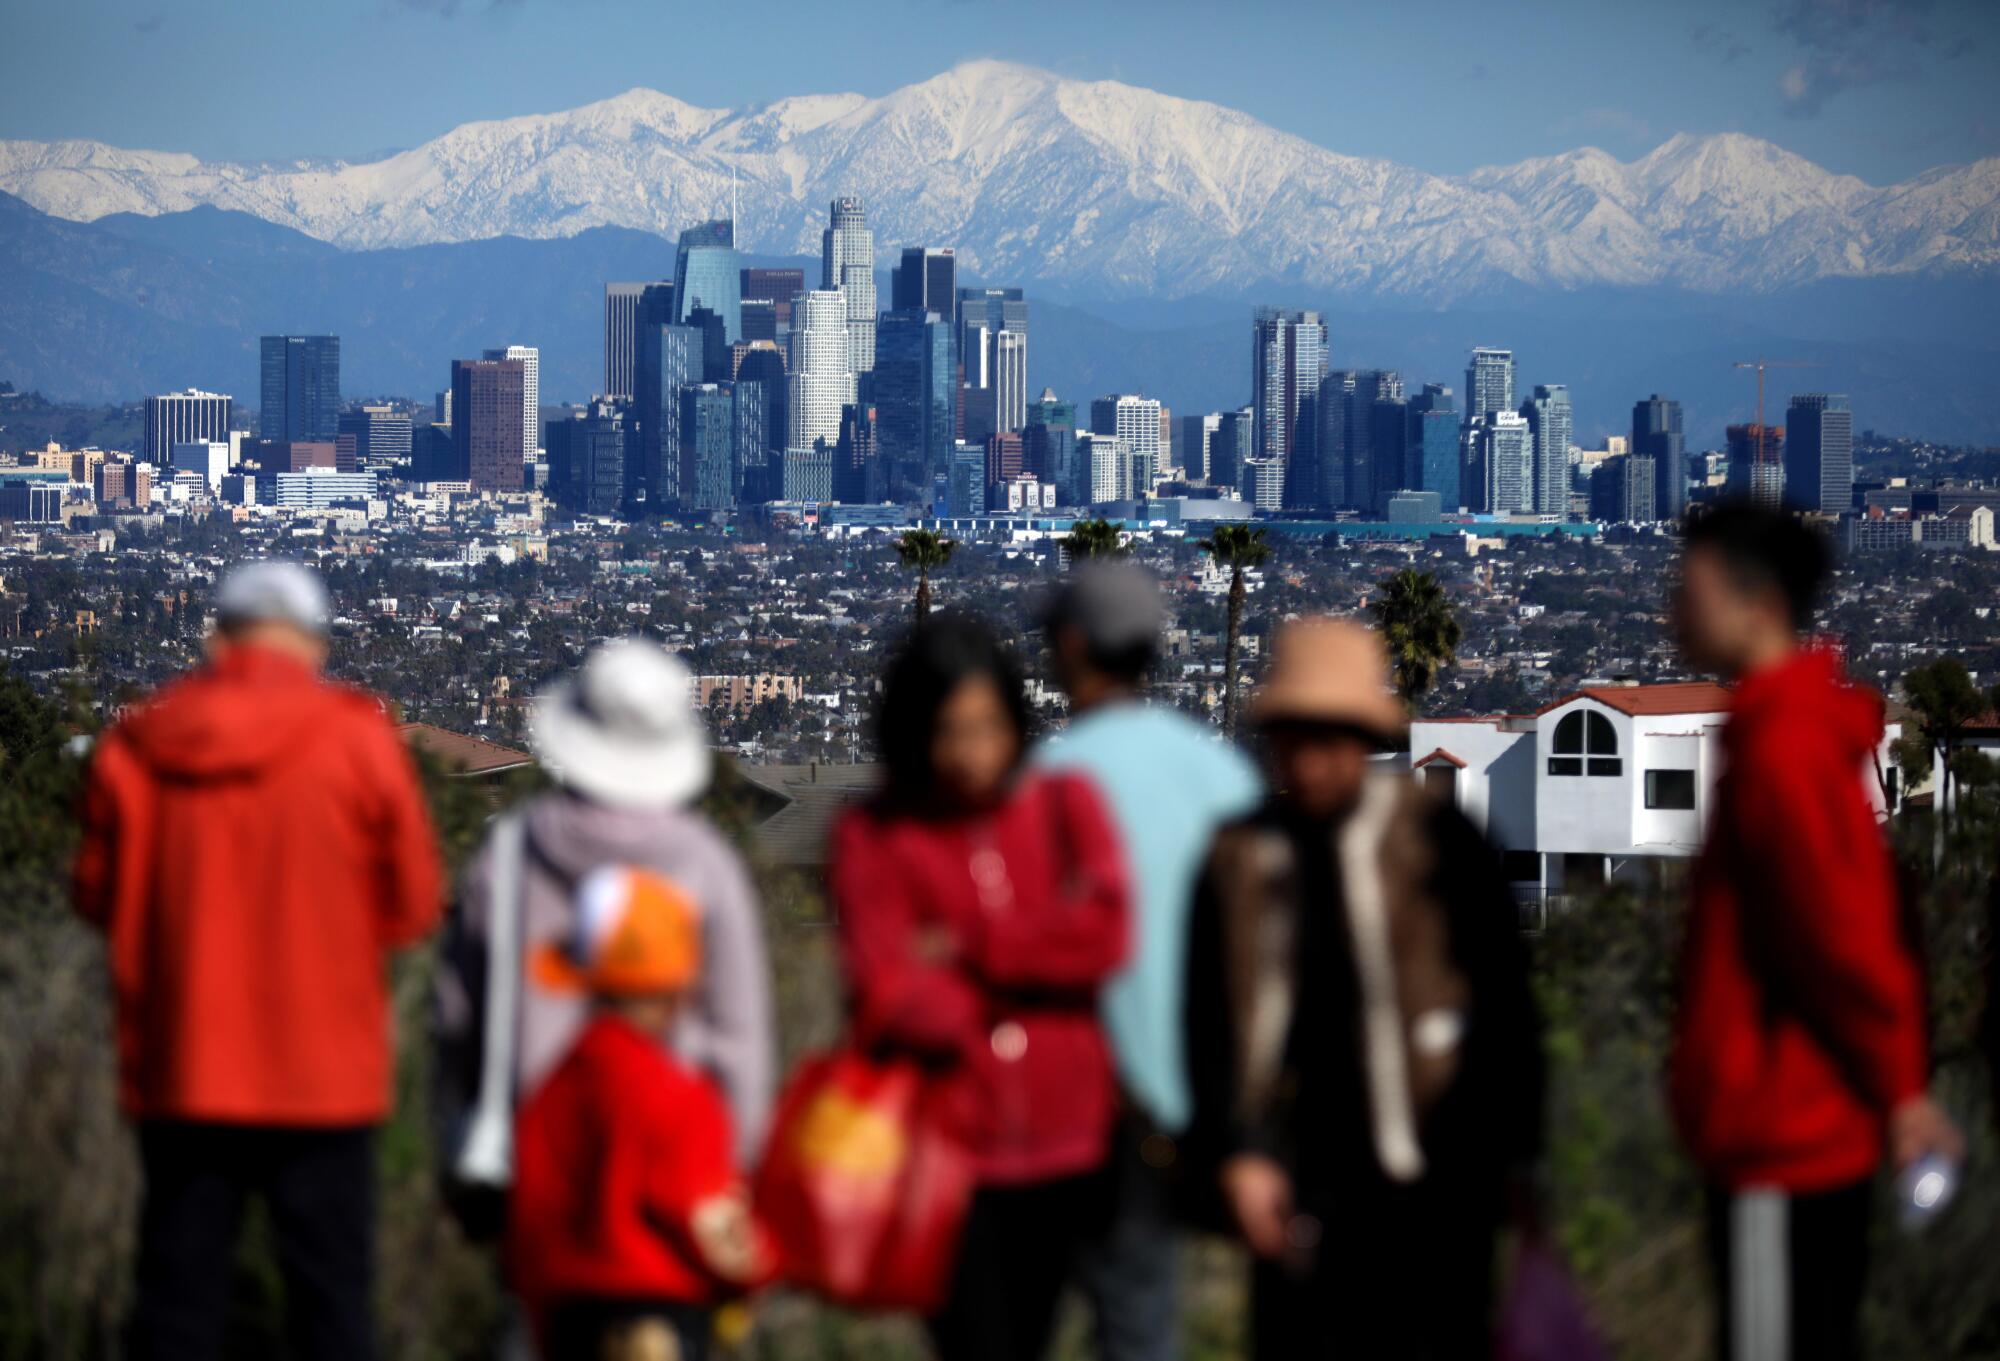 Many came to view the Los Angeles skyline against a backdrop of snow capped San Gabriel mountains.